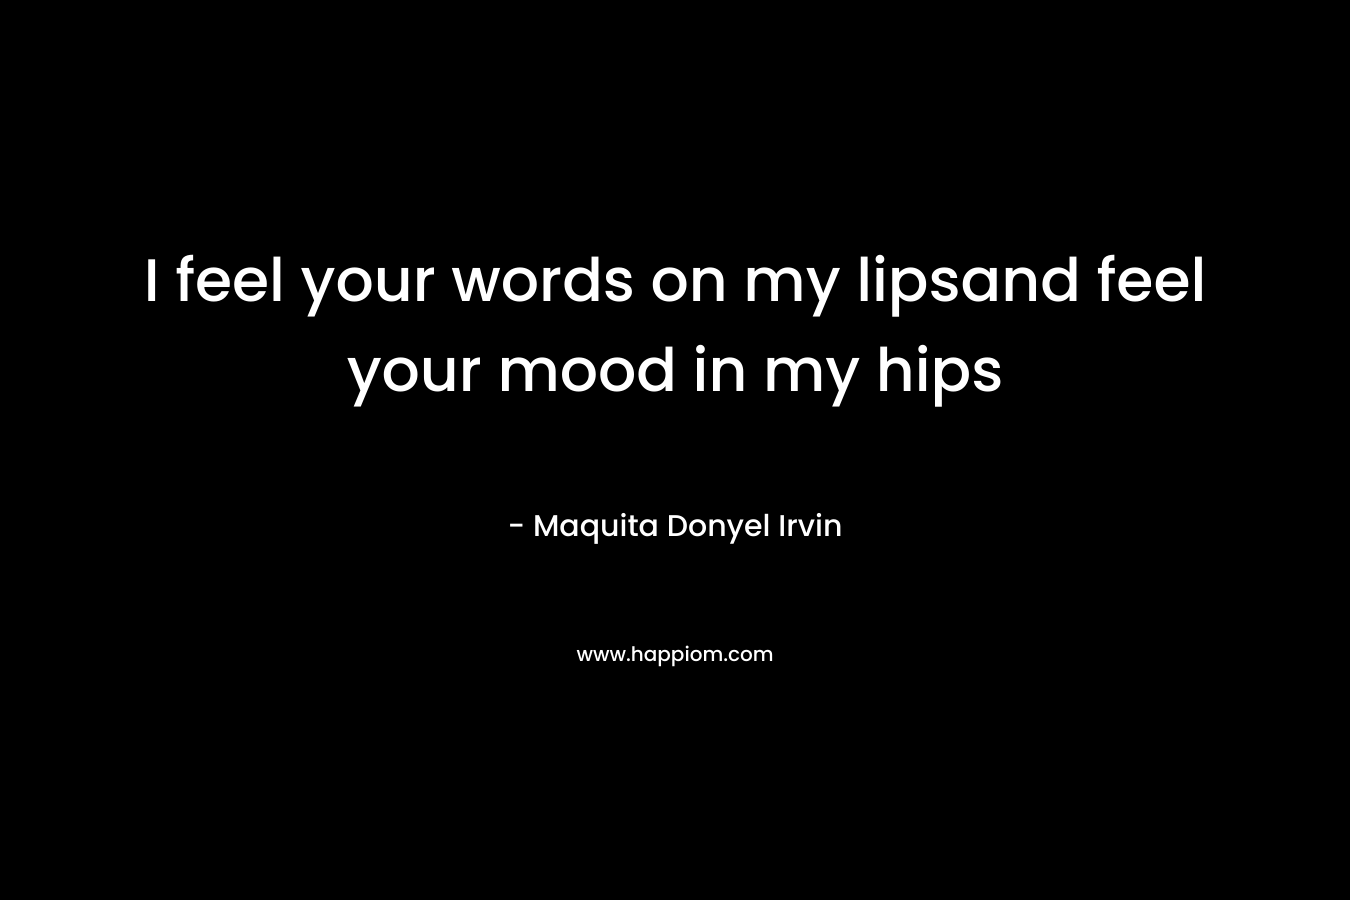 I feel your words on my lipsand feel your mood in my hips